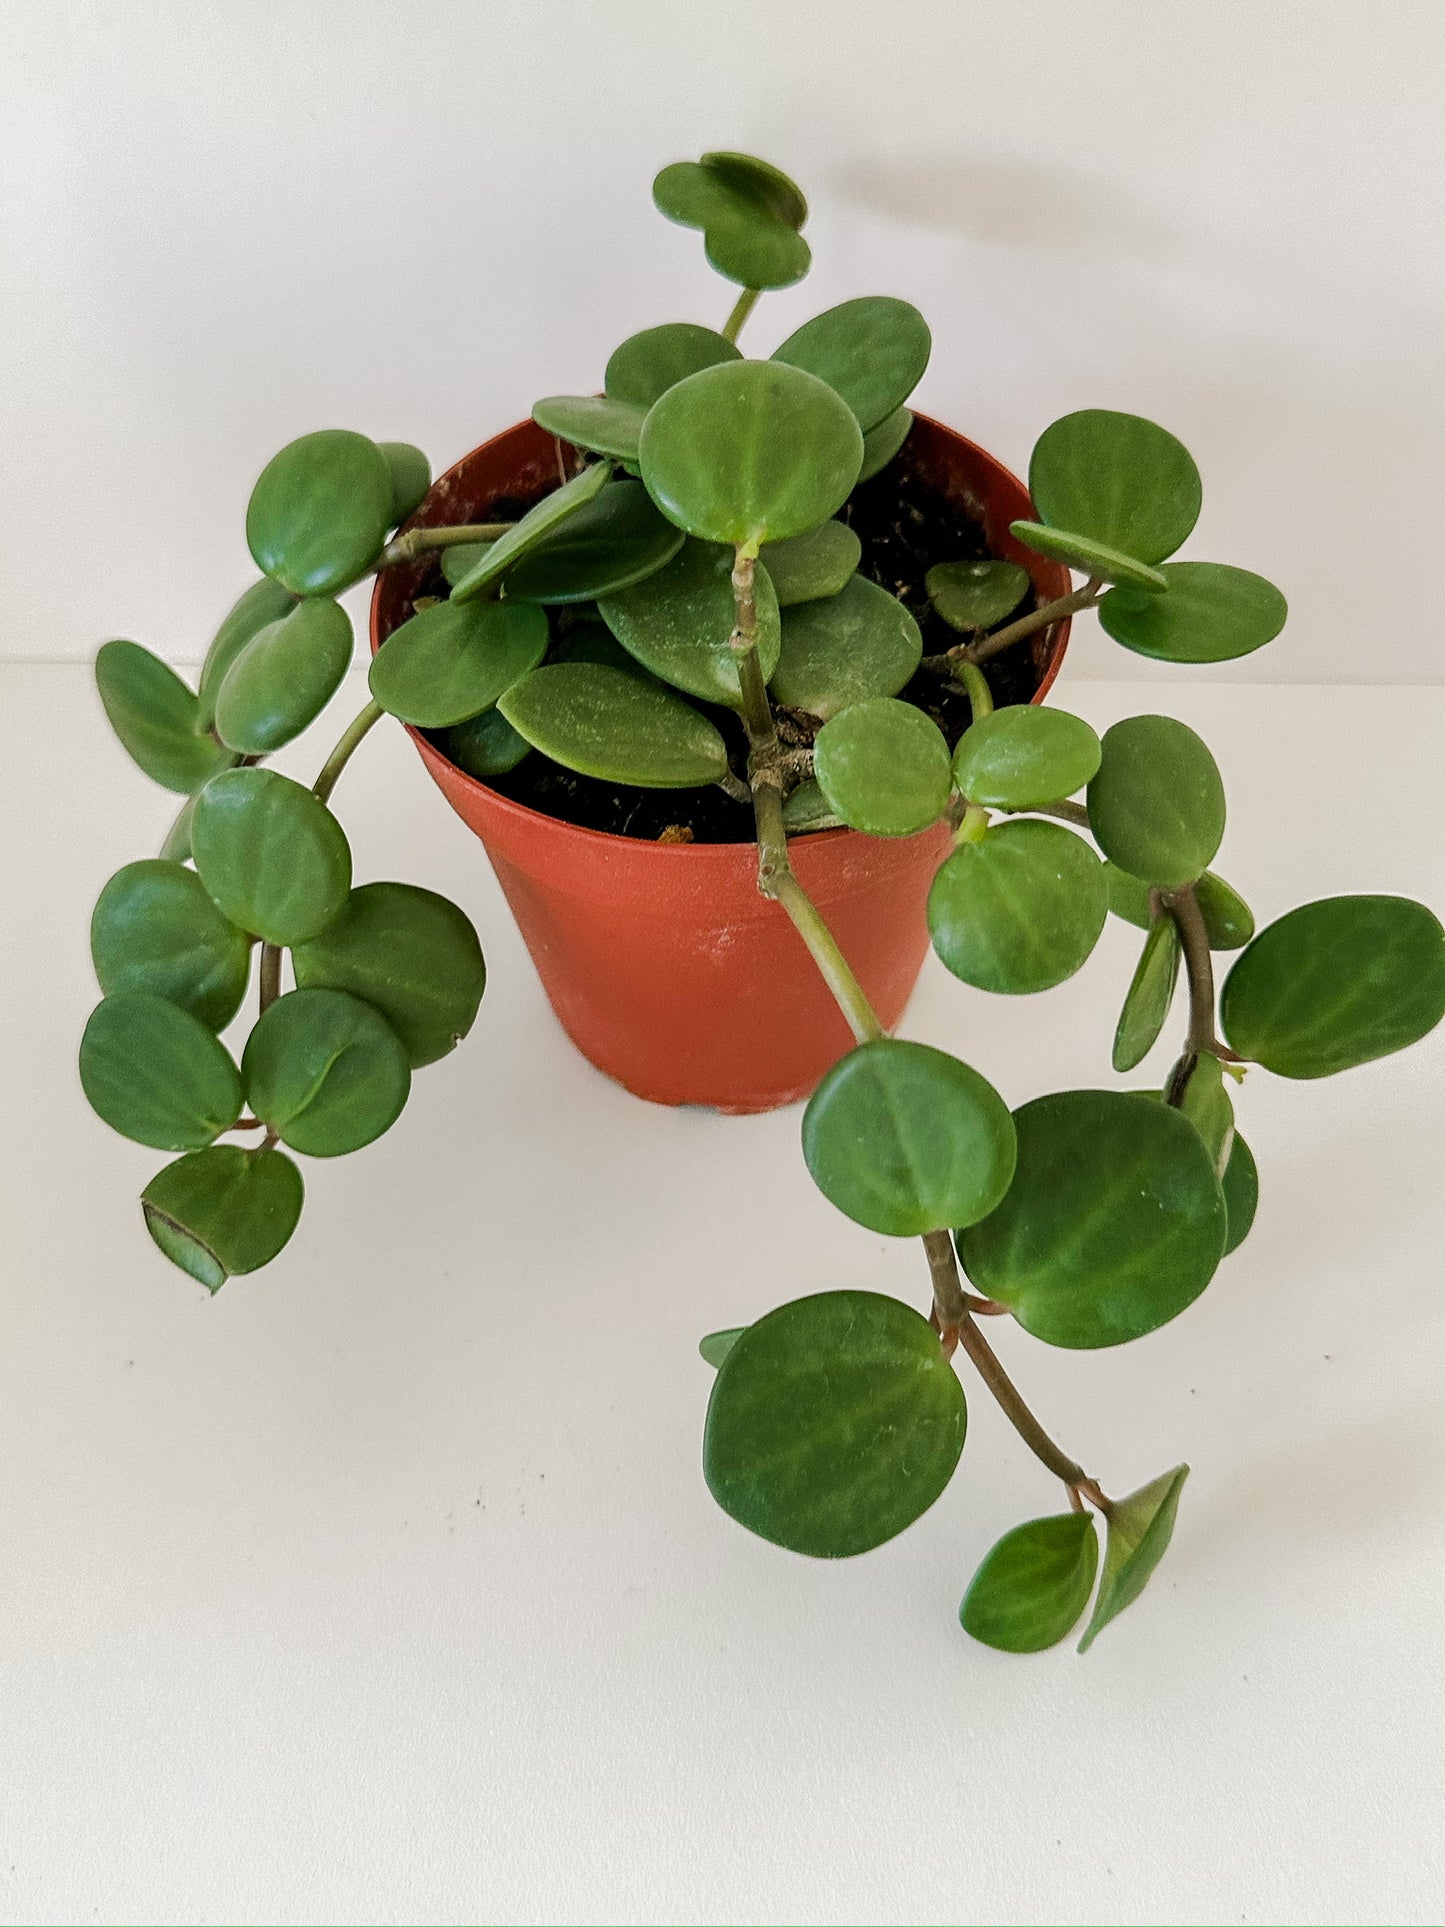 Peperomia Tetraphylla 'Hope'- (🐾 Pet Friendly), 🌱 Beginner-Friendly, Low Light & Maintenance- Tropical Houseplant- (3 Inch, 4 Inch, Or 6 Inch Nursery Pot)